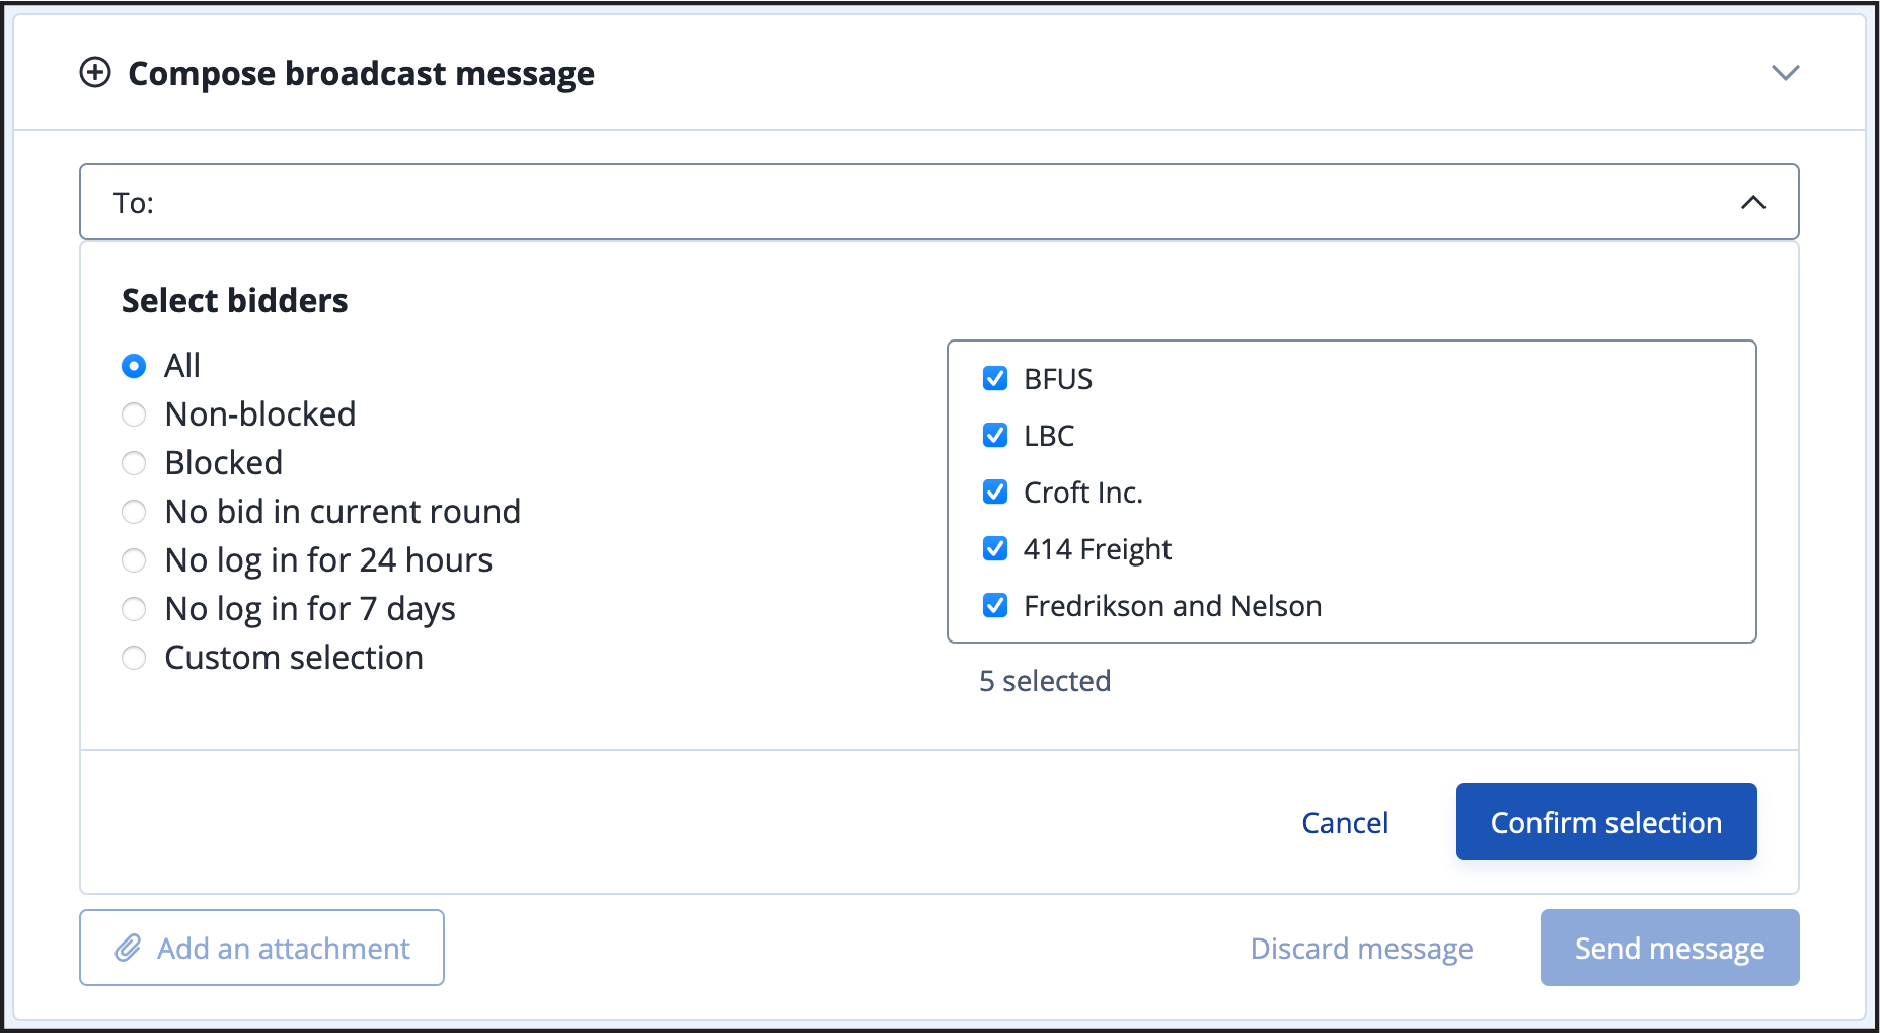 Compose message area — All bidders selected